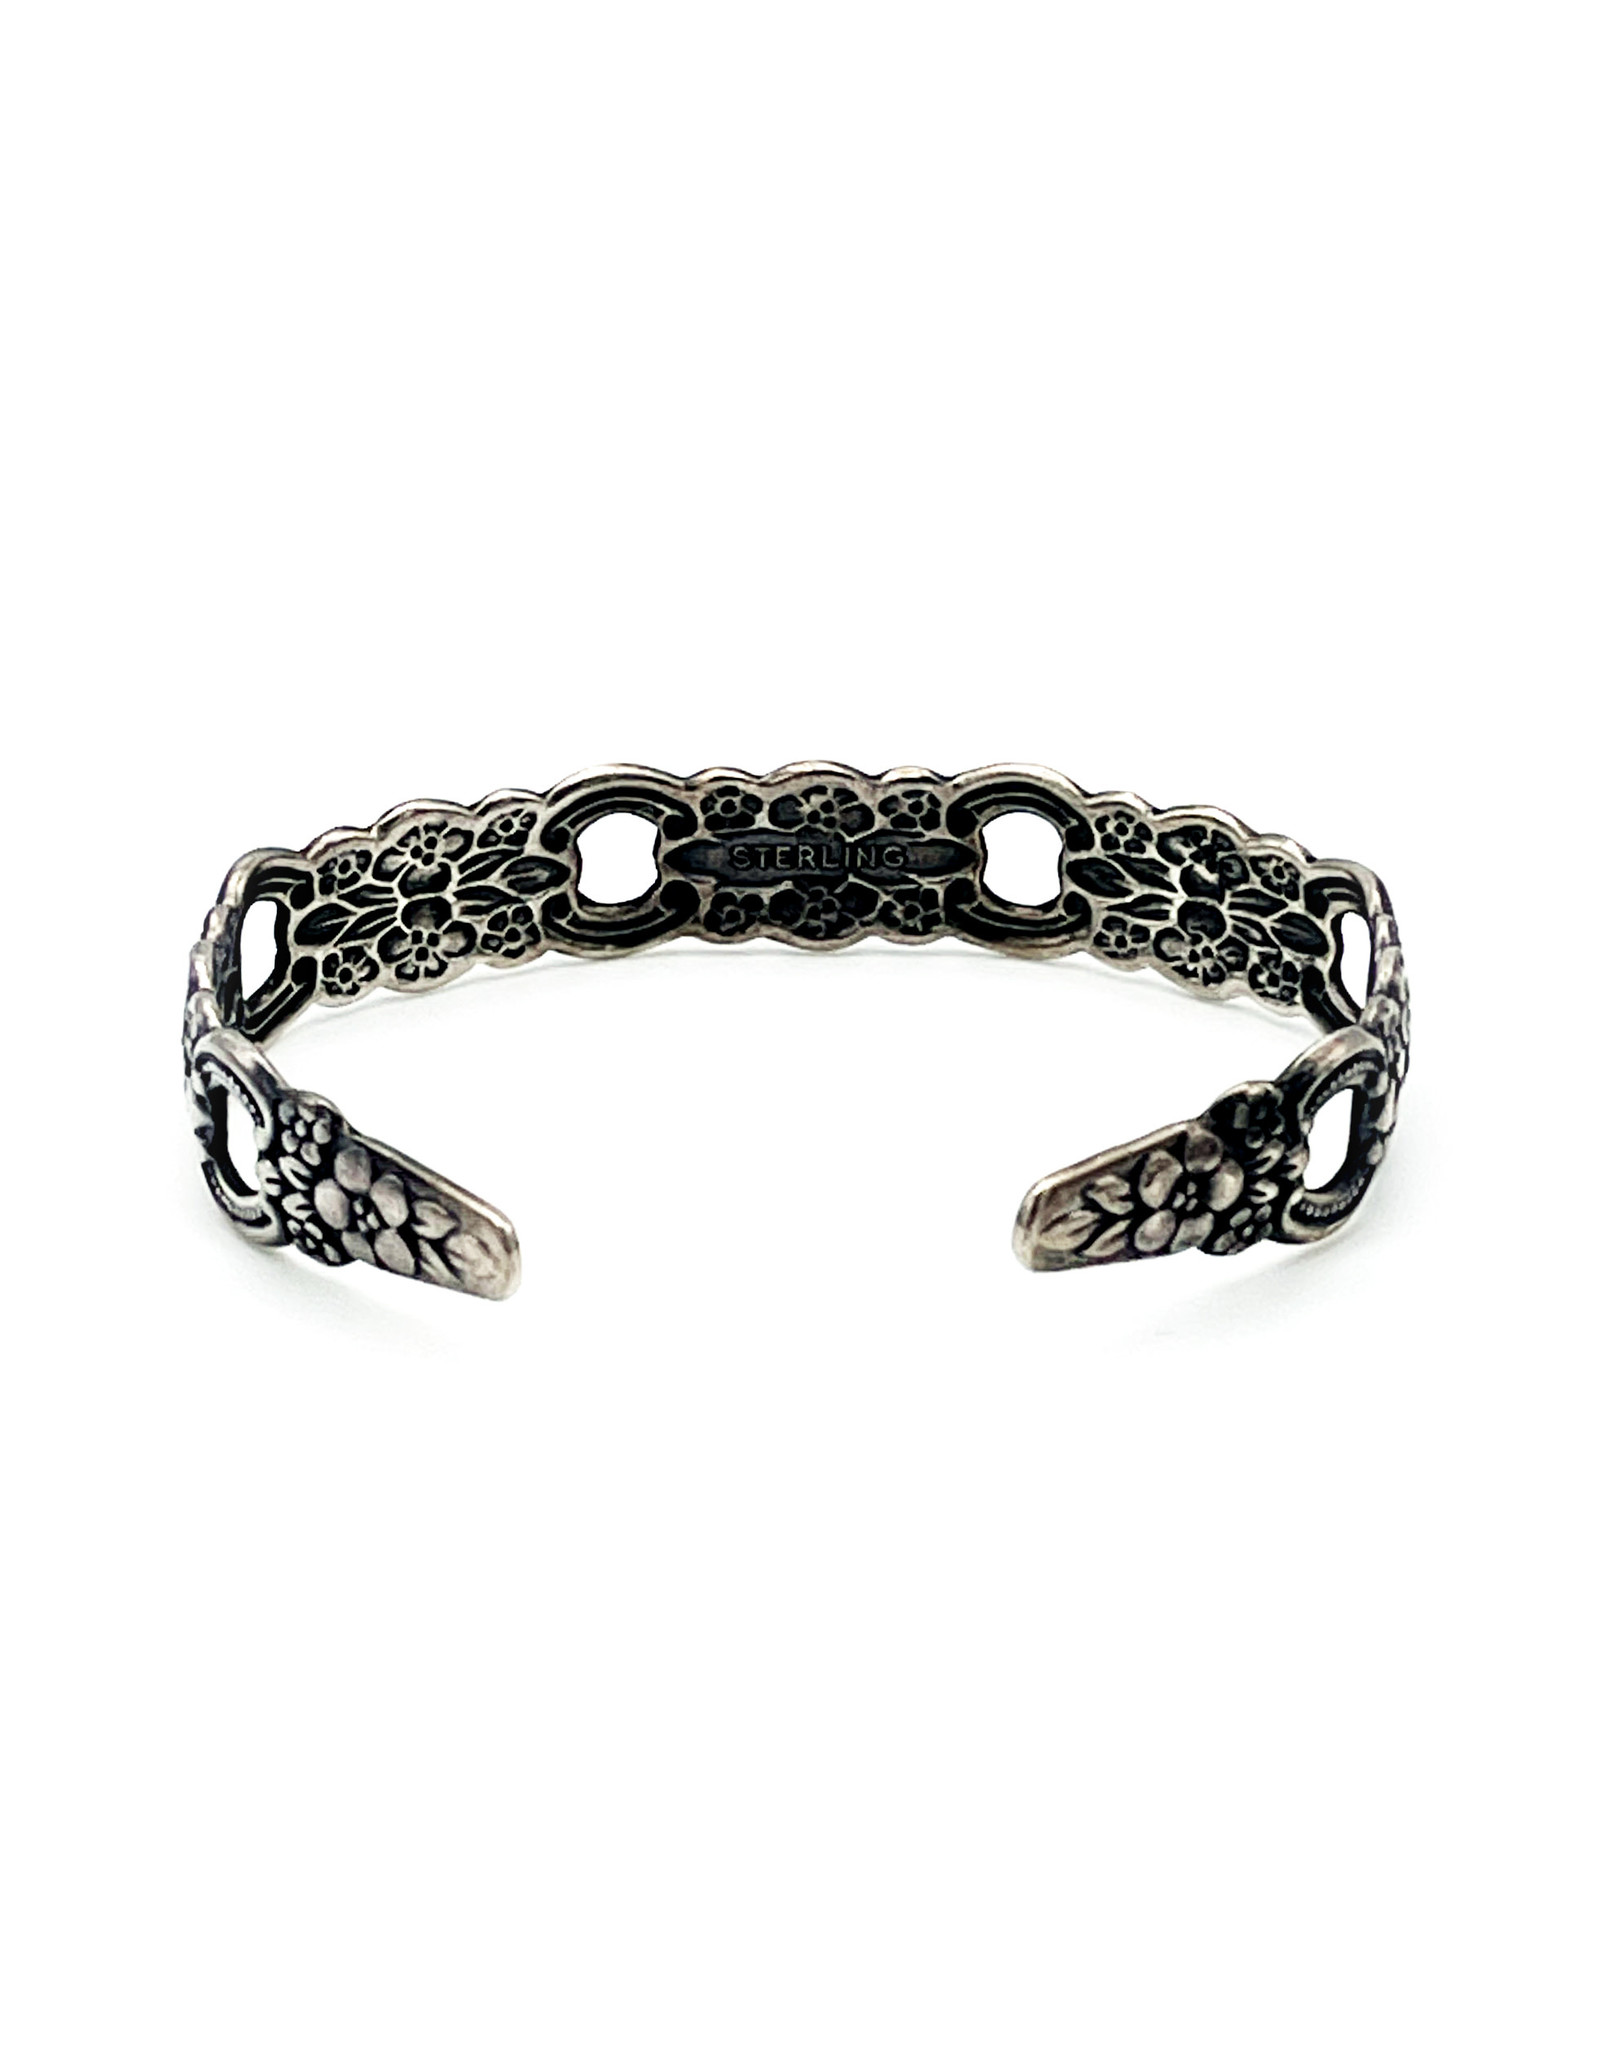 Sterling Victorian-Style Floral Cuff Bracelet